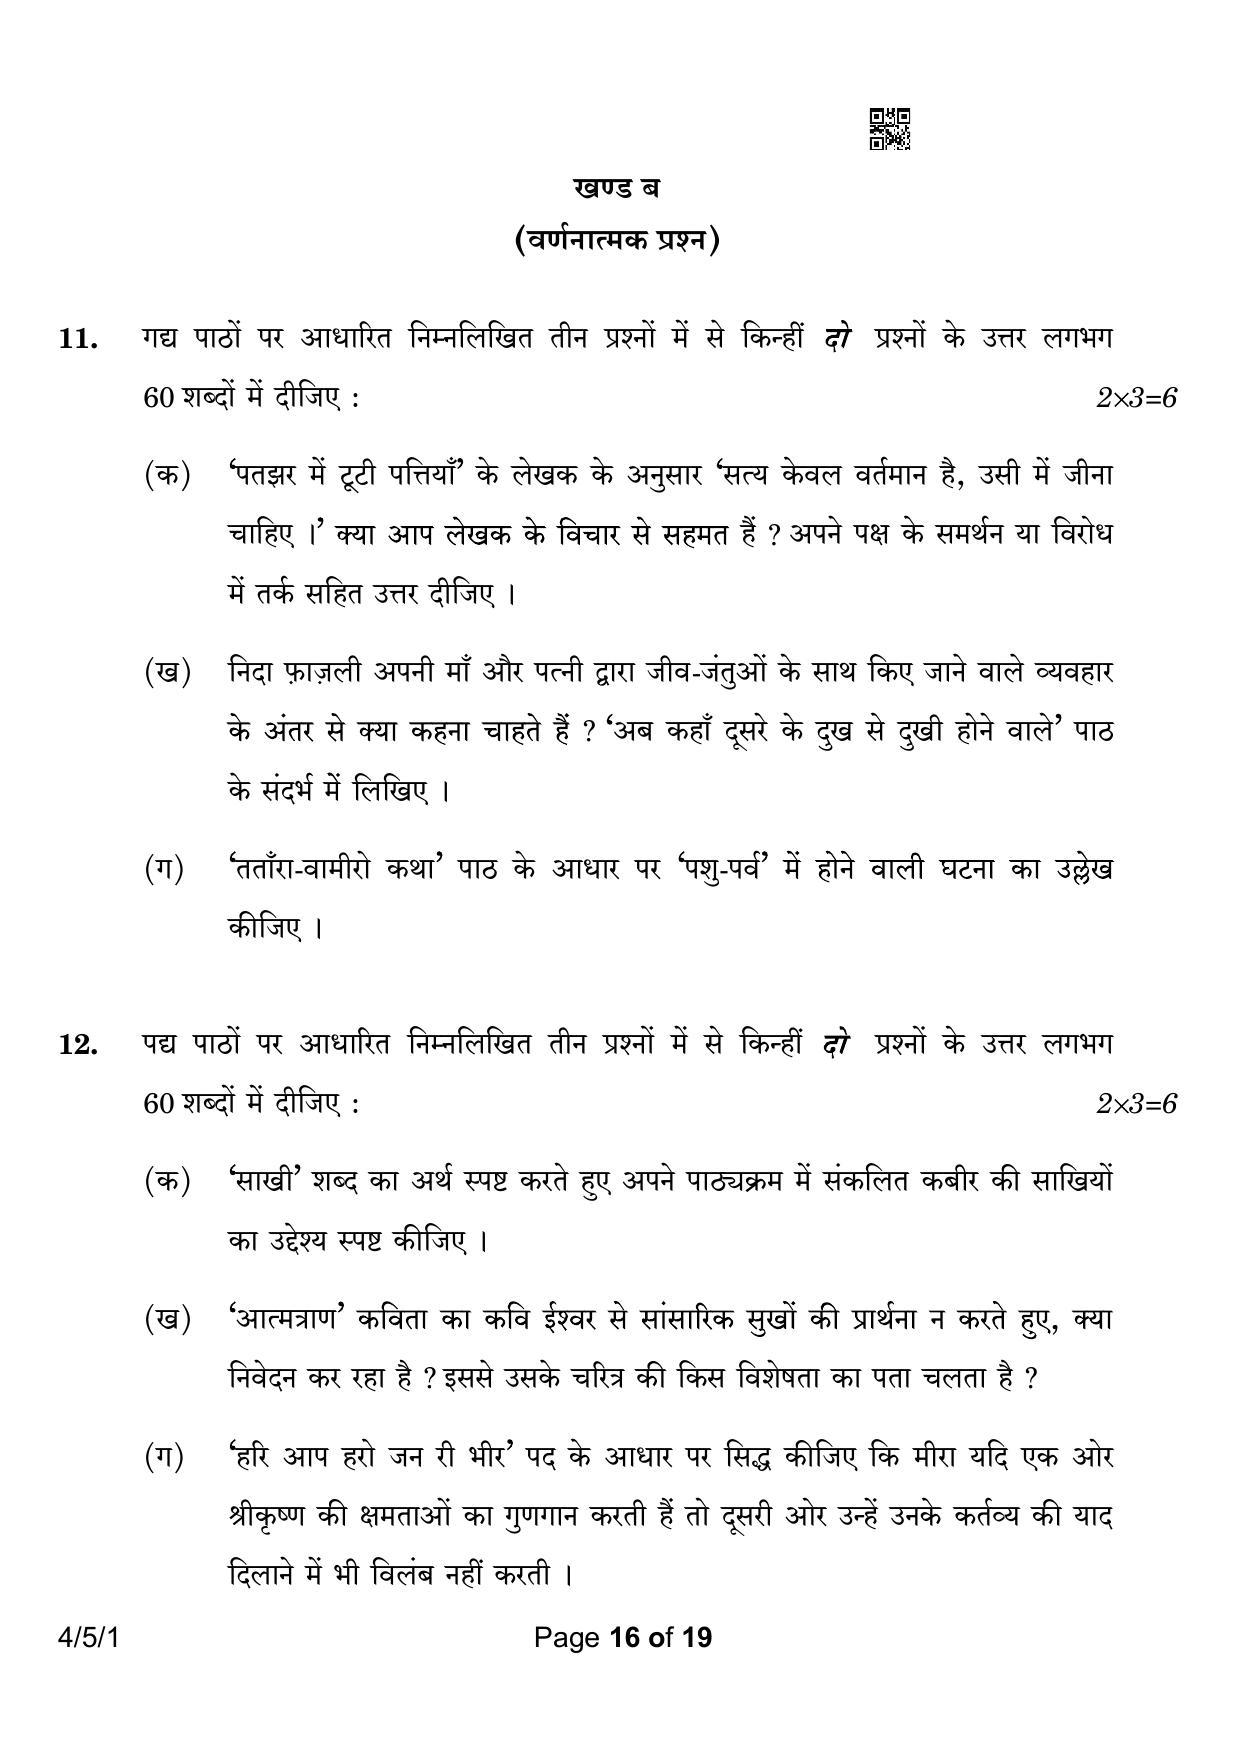 CBSE Class 10 4-5-1 Hindi B 2023 Question Paper - Page 16